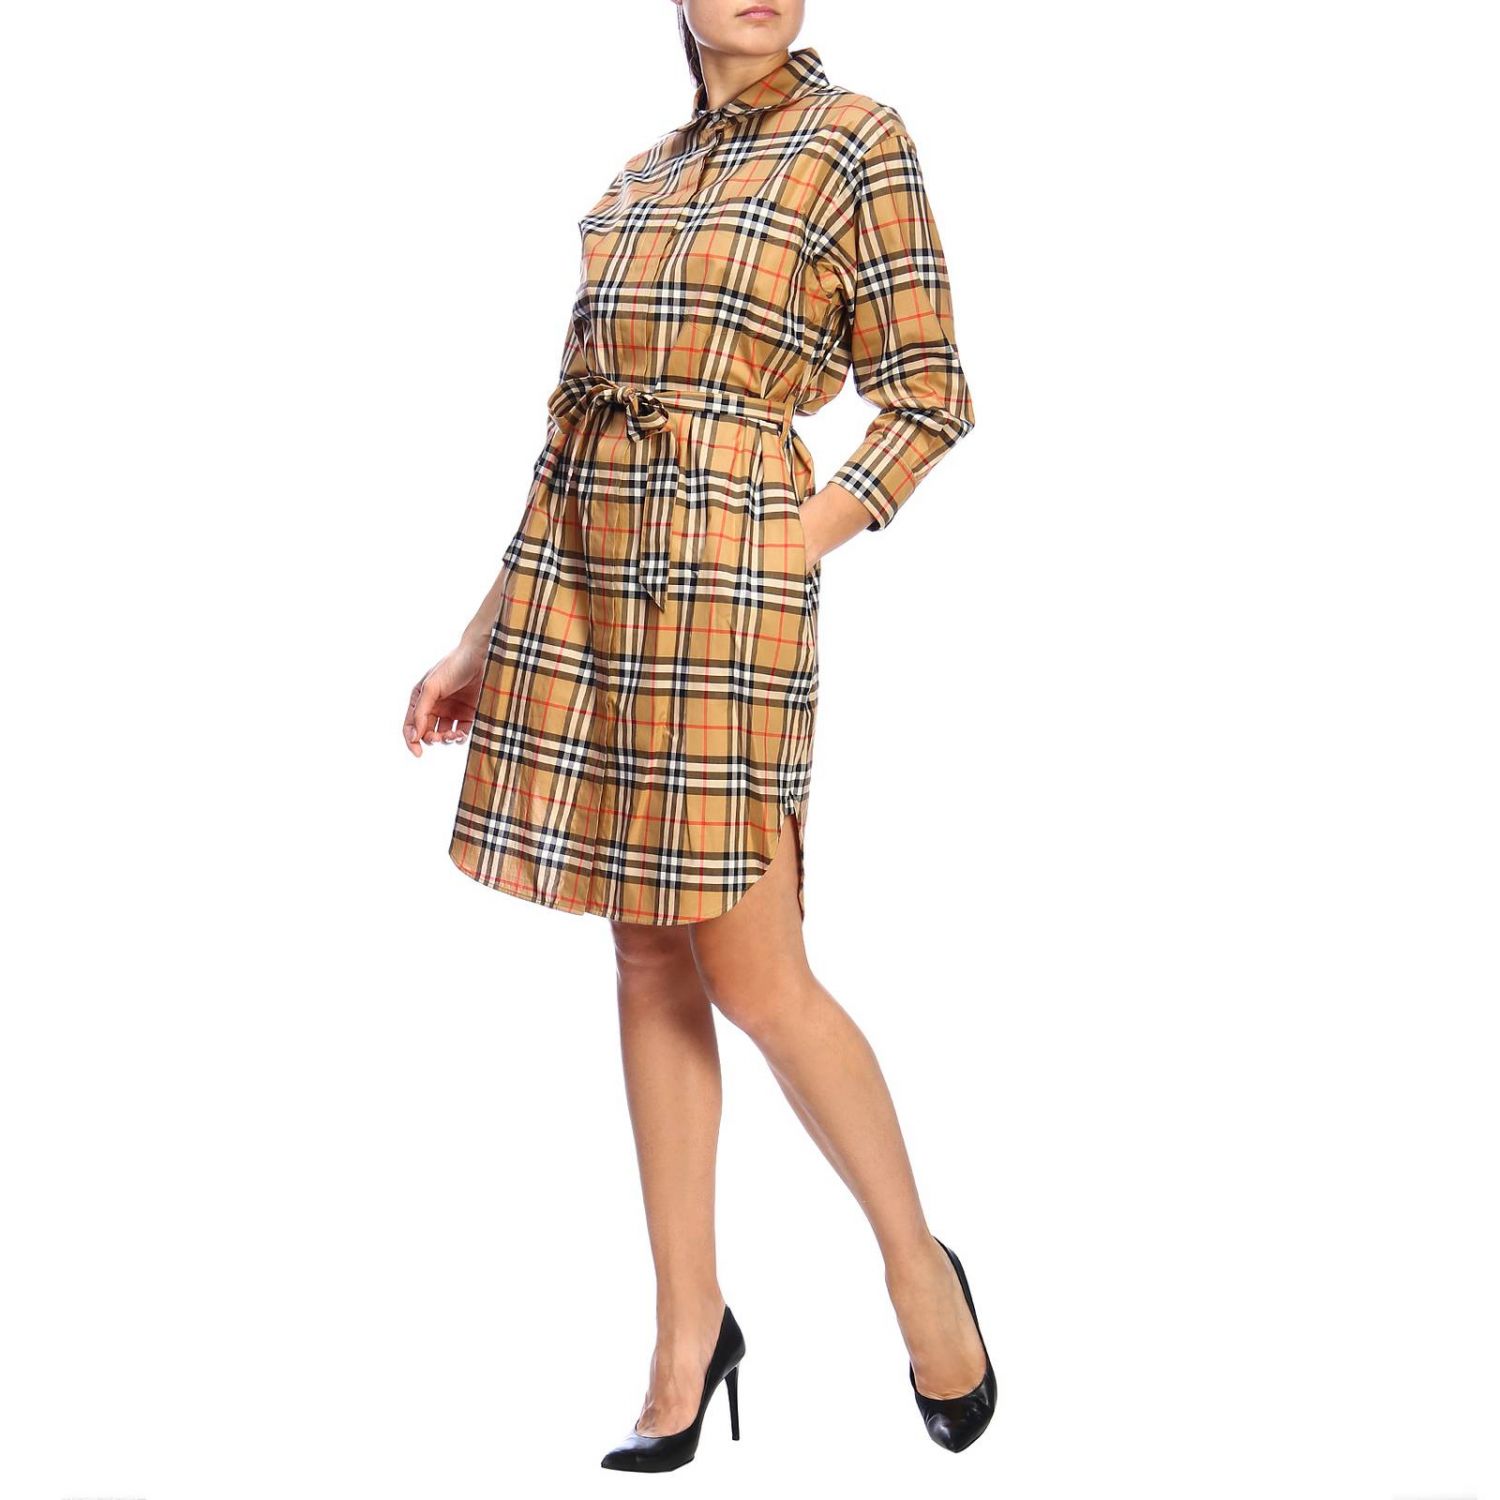 Isotto chemisier dress with Burberry 